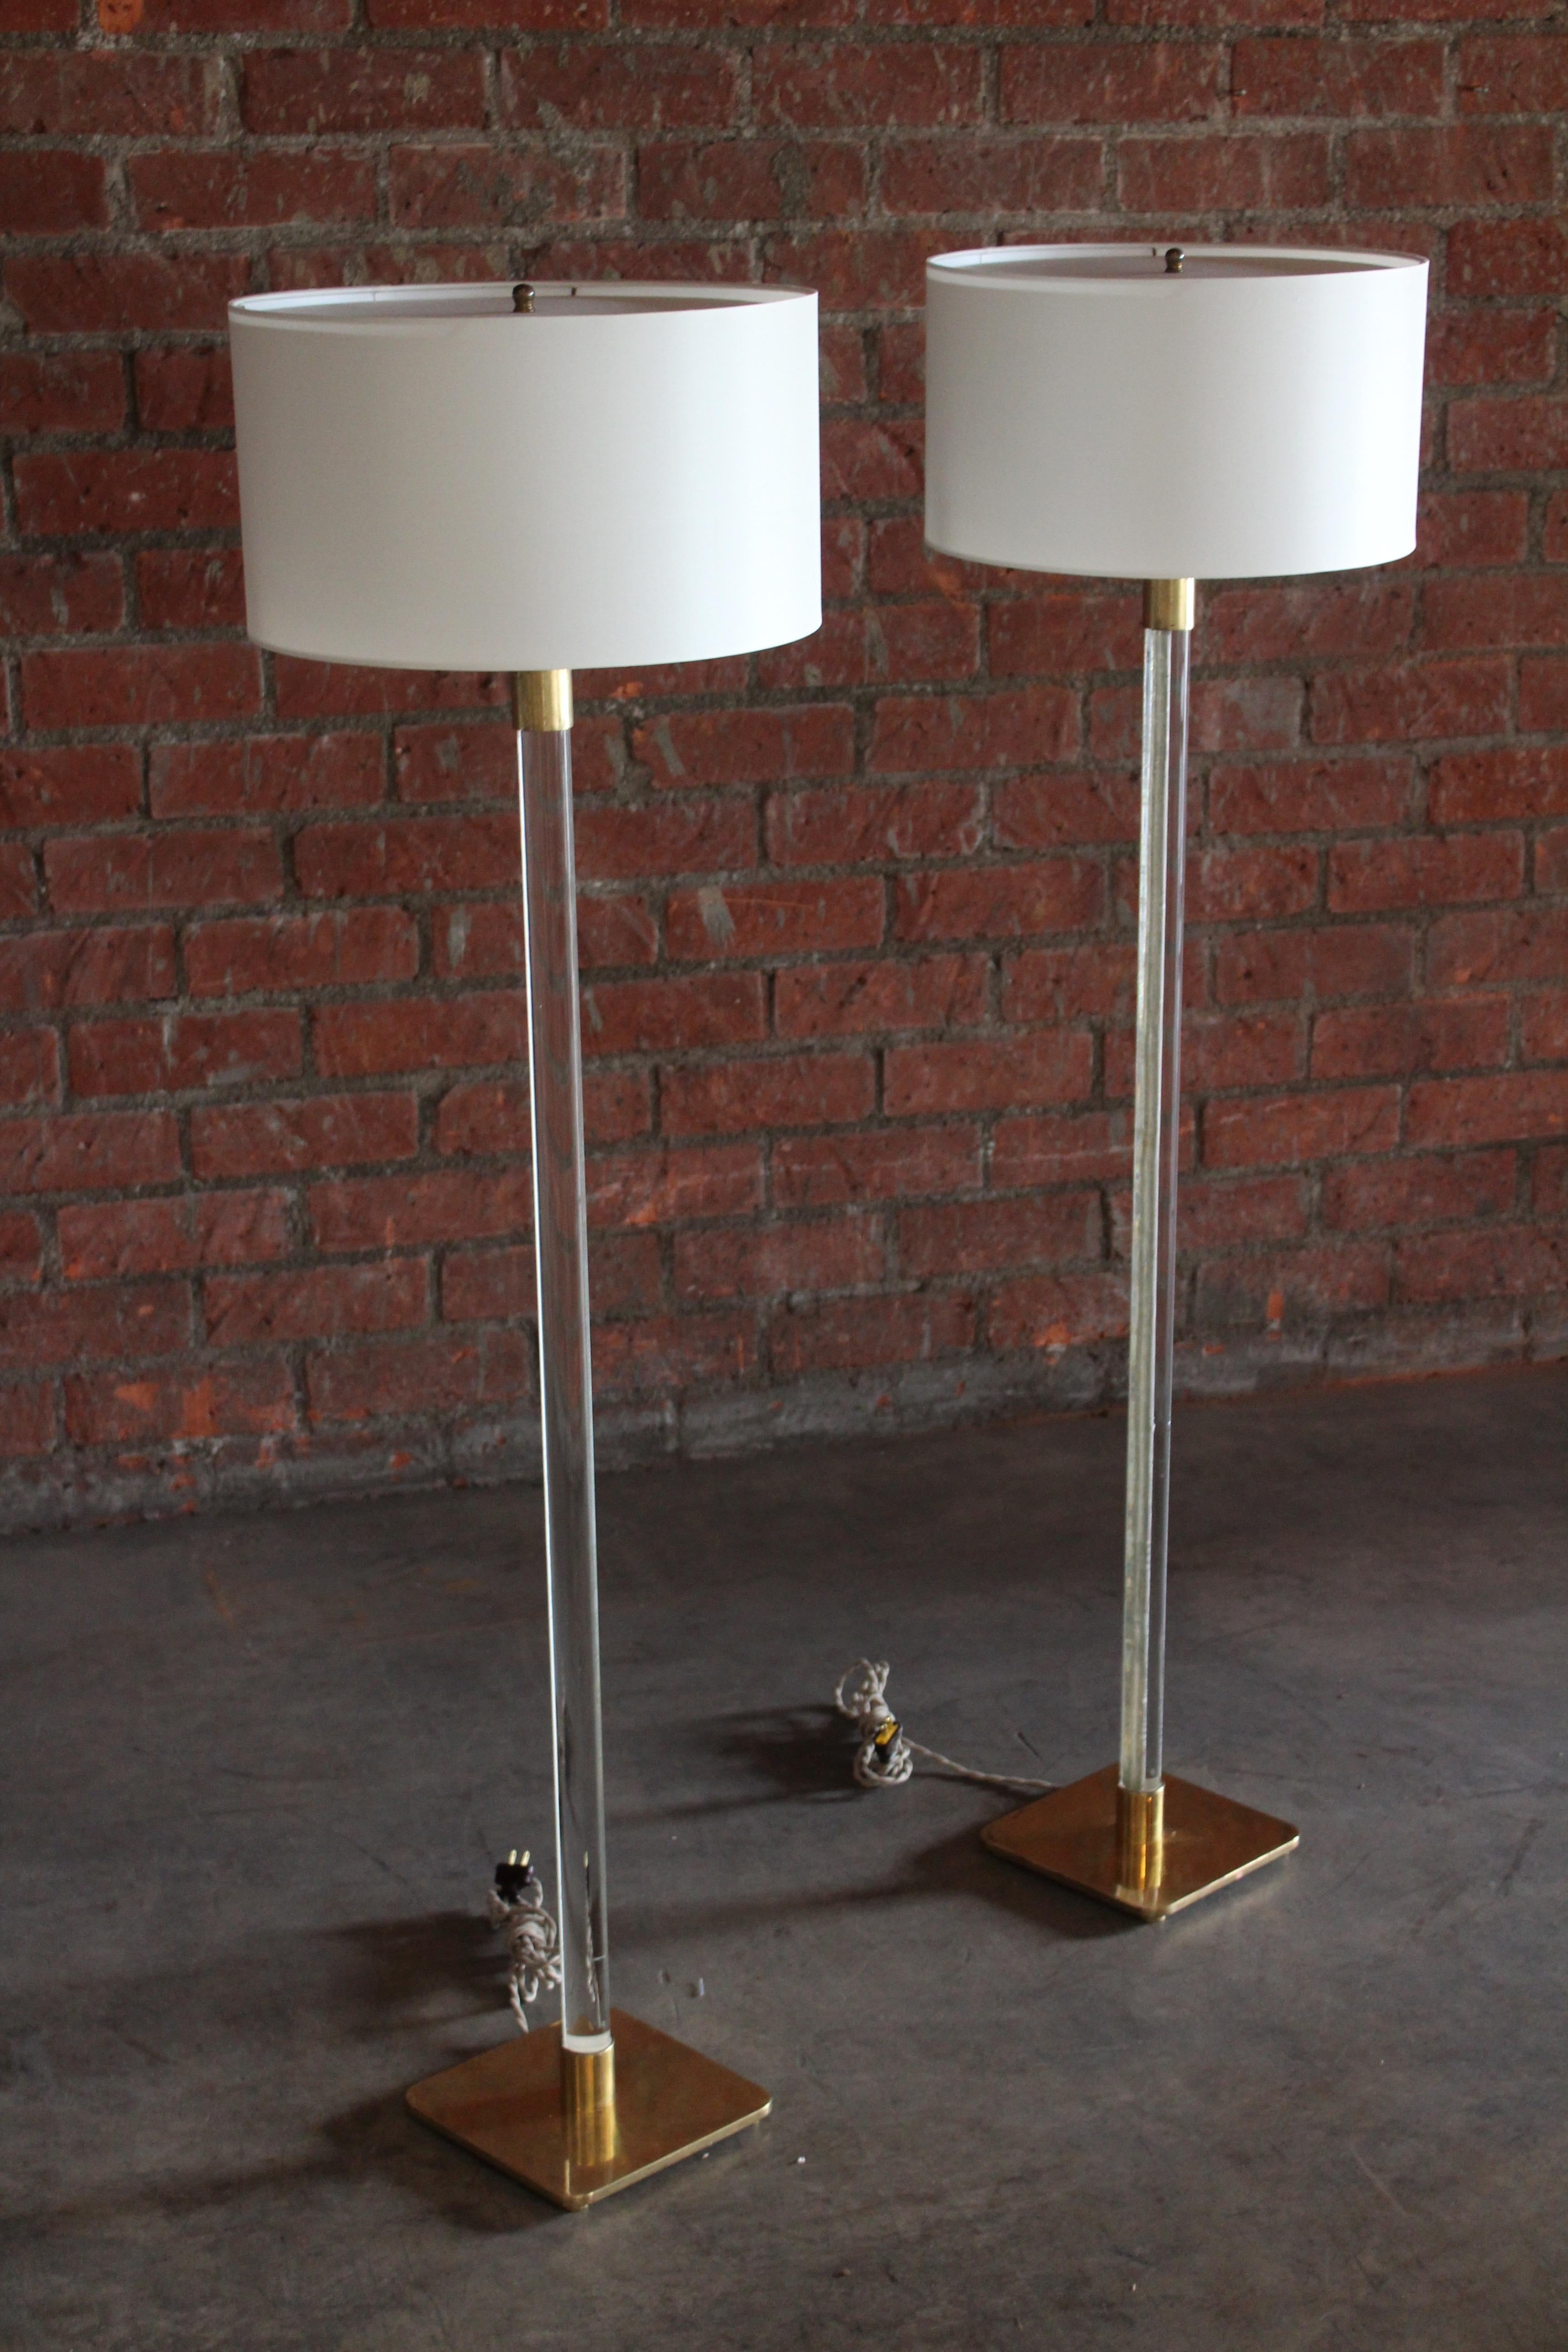 Pair of Glass & Brass Floor Lamps by Hansen, NYC, 1970s For Sale 7